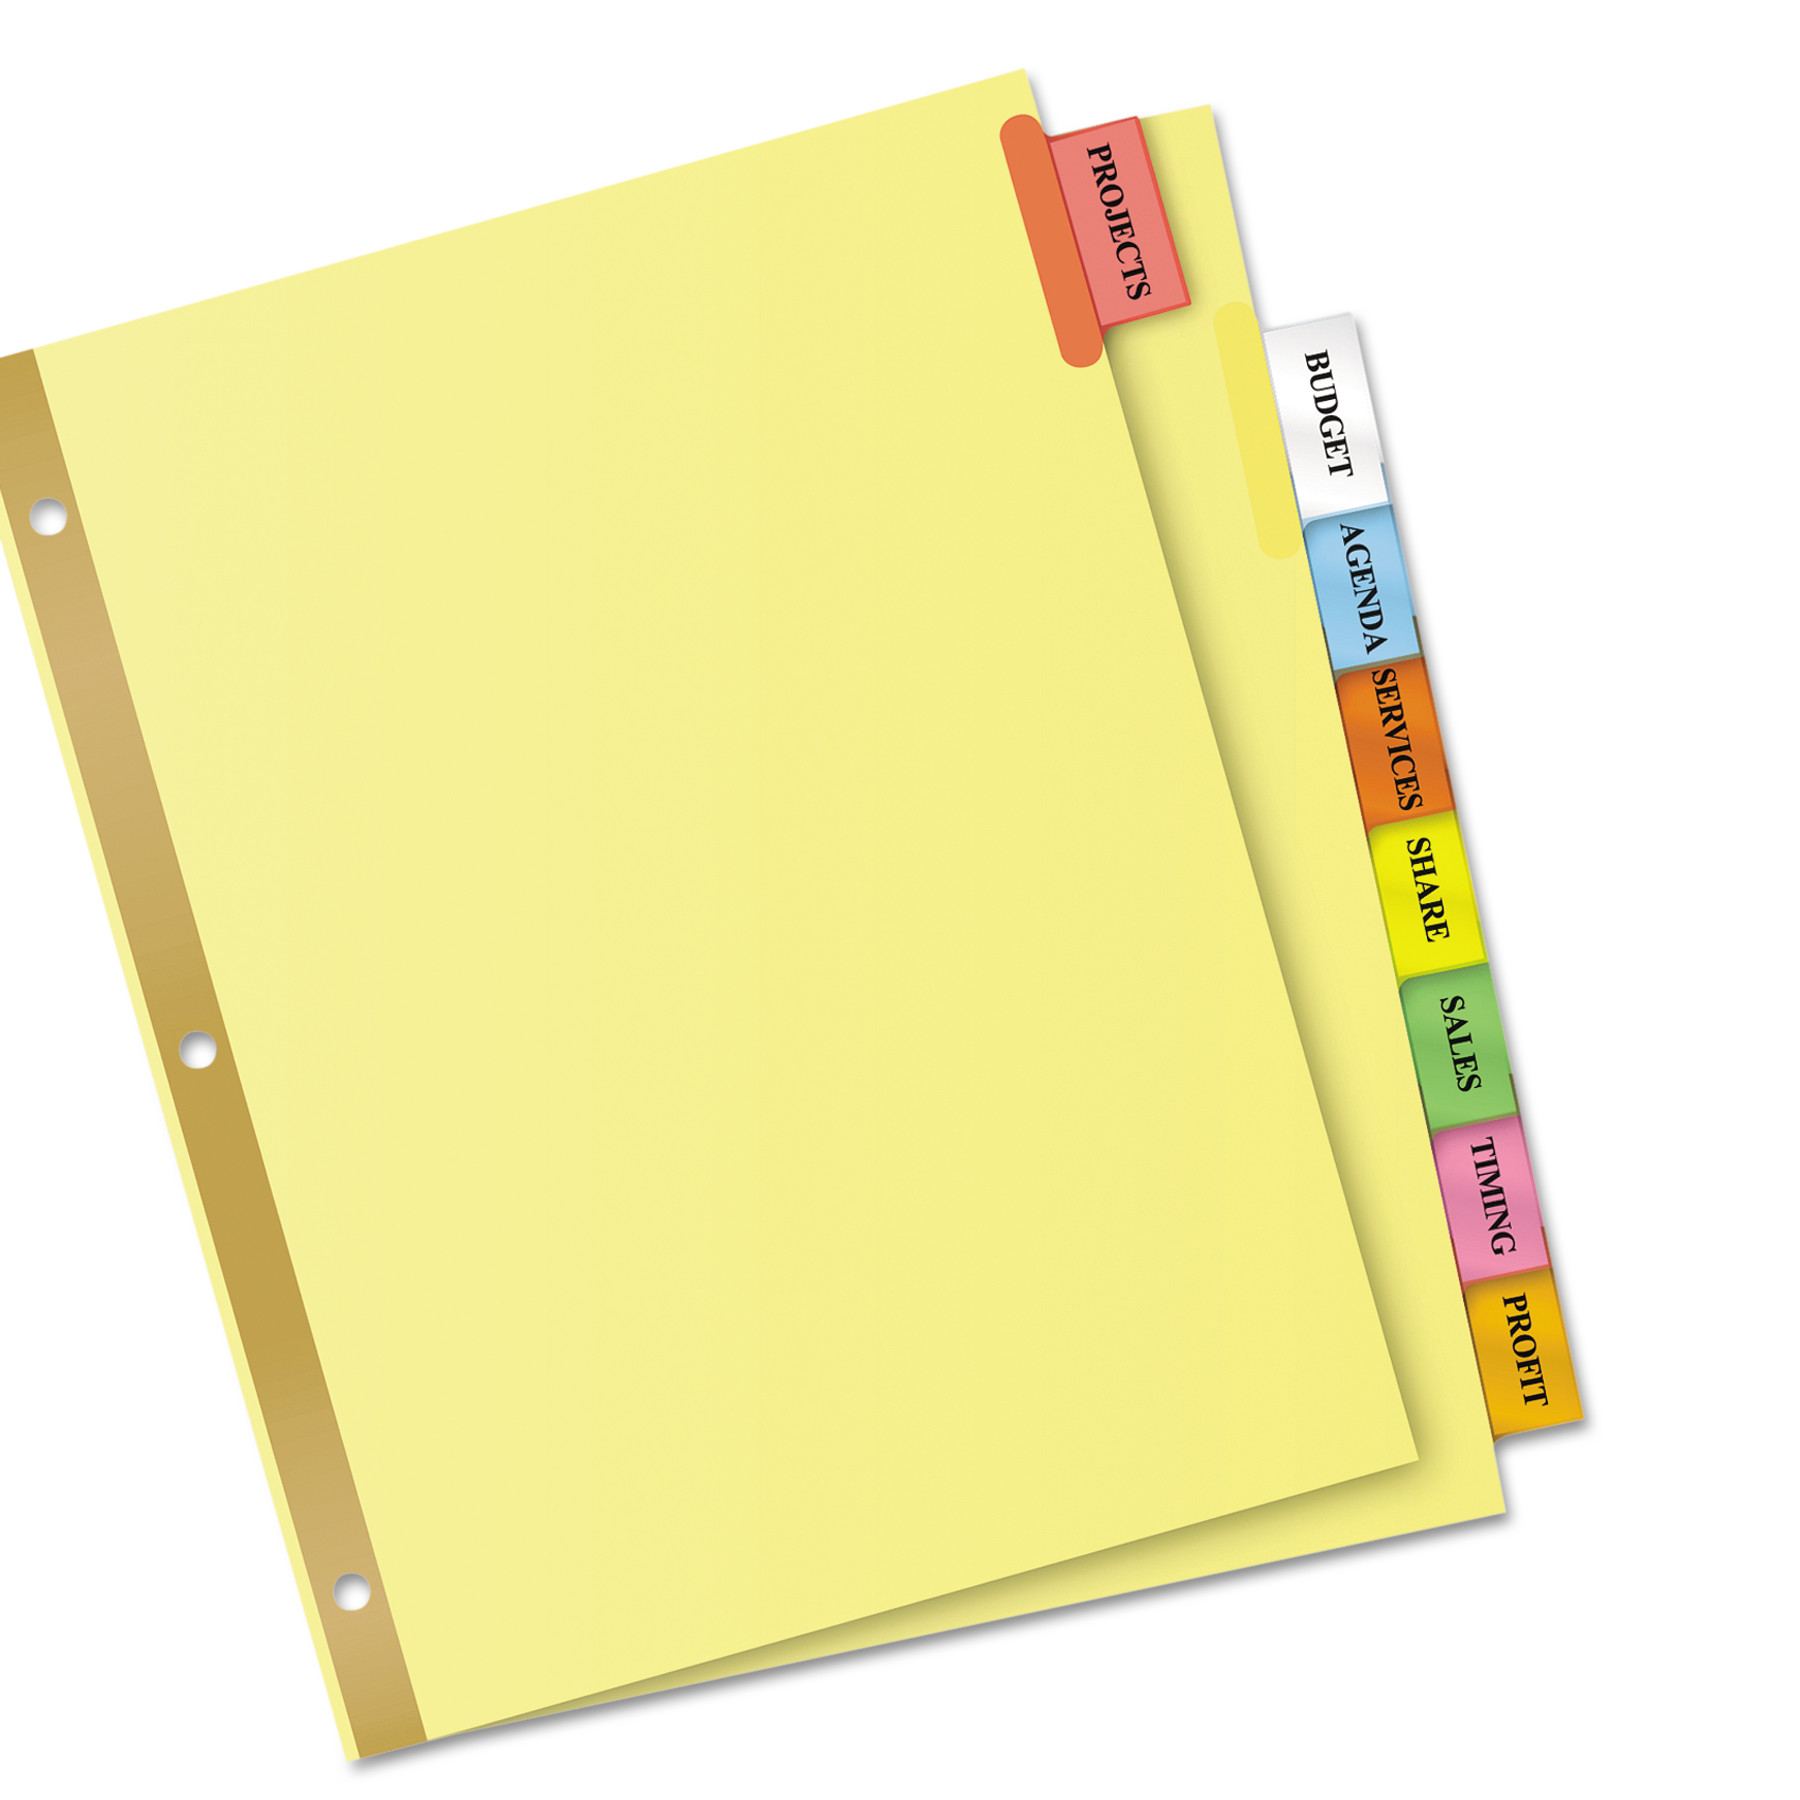 Avery Big Tab Insertable Dividers, Buff Paper, Multicolor Tabs, 8-Tab Set (11111) - image 2 of 4